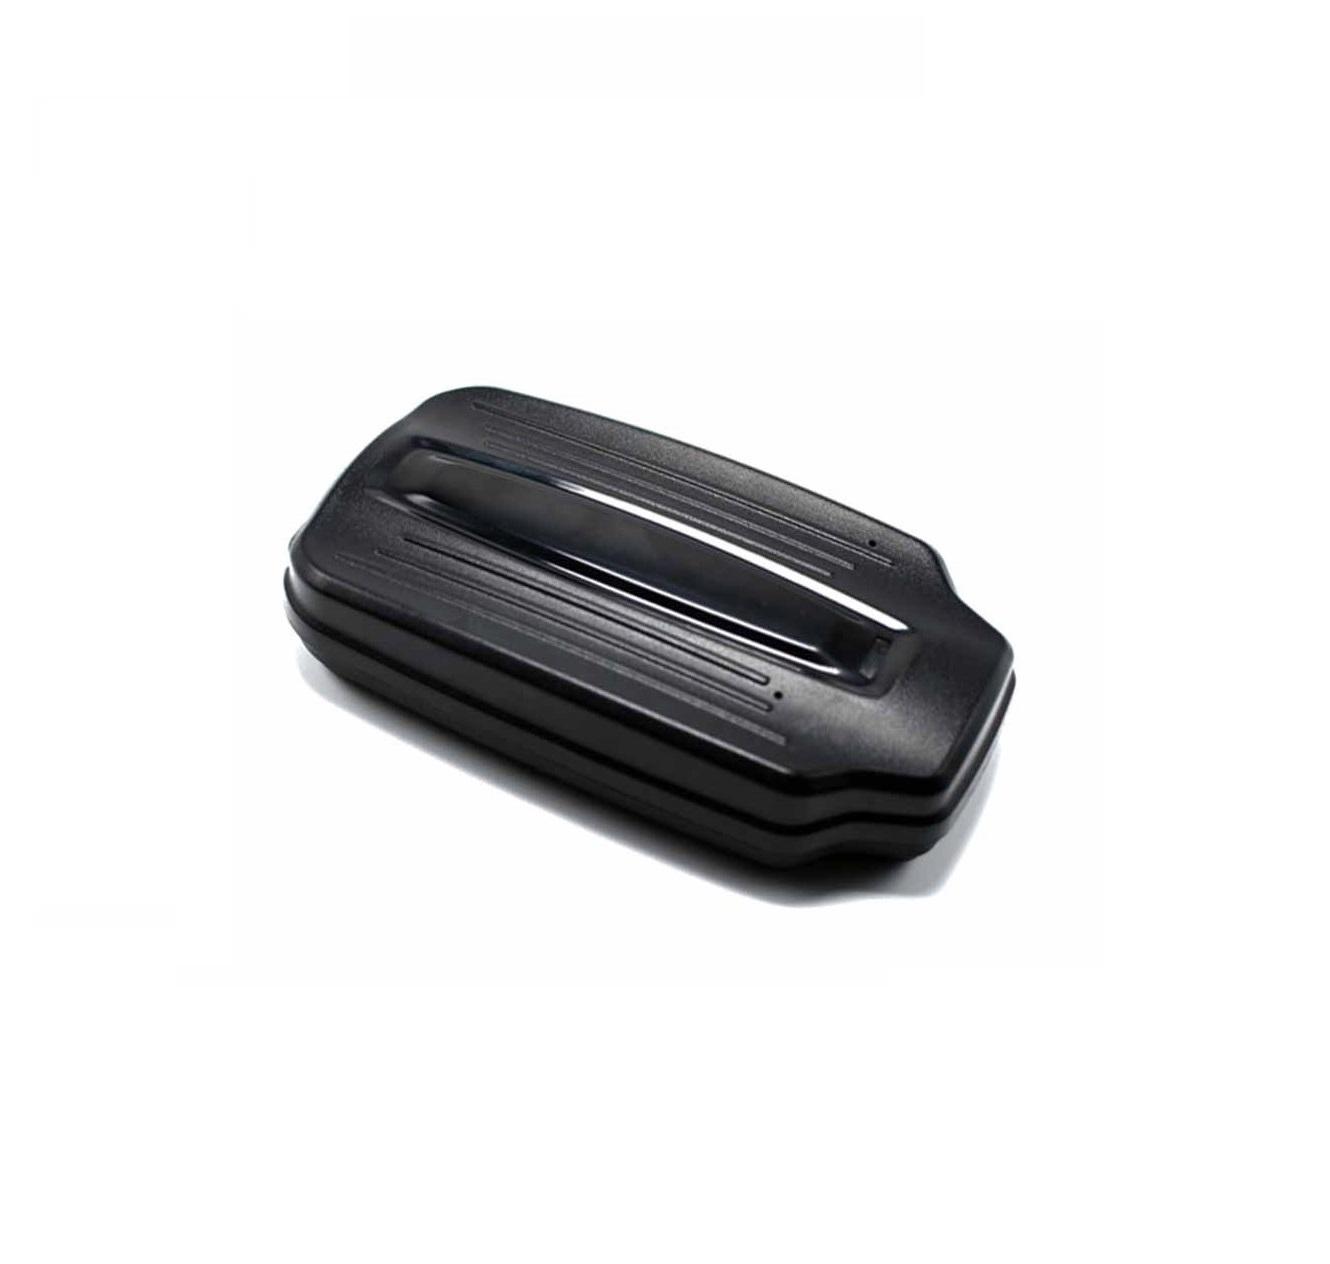 Image of Globaltrace G950 GPS Tracker - Globaltrace